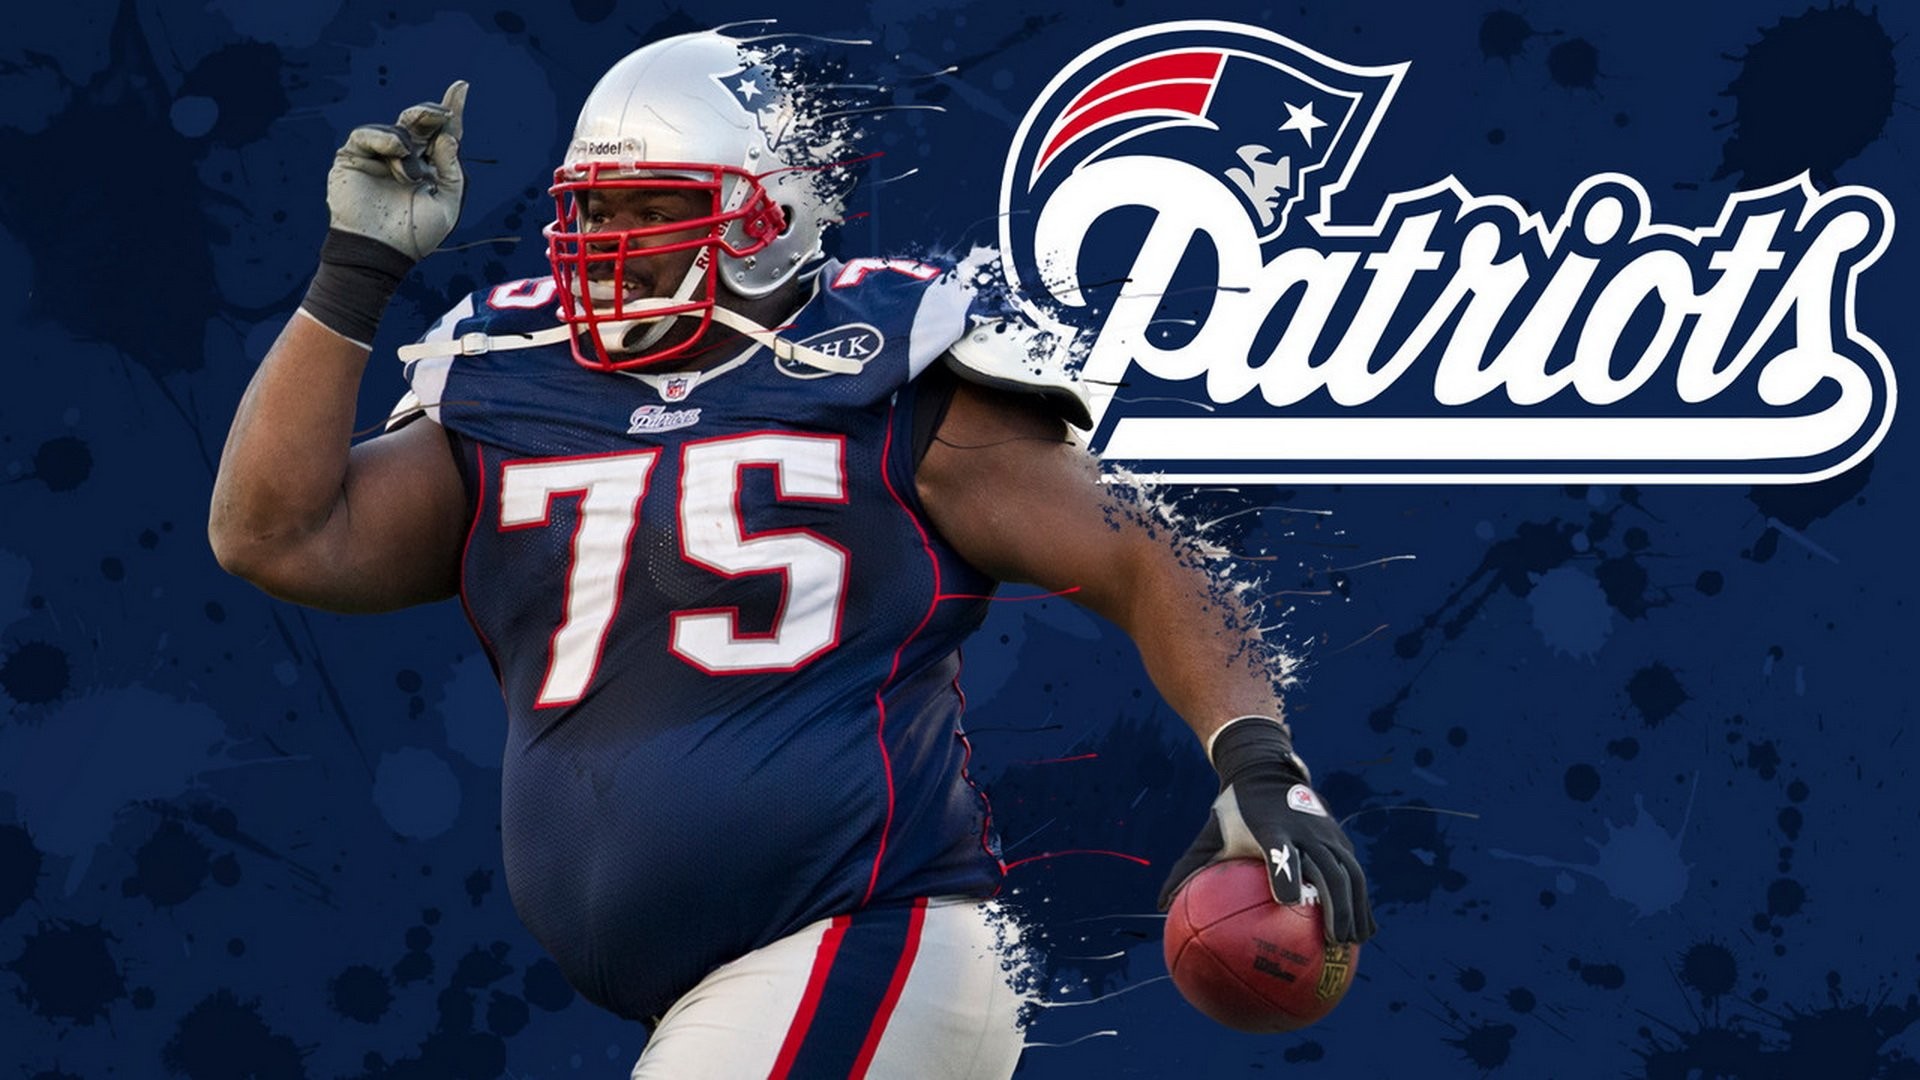 Patriots Backgrounds HD with resolution 1920x1080 pixel. You can make this wallpaper for your Mac or Windows Desktop Background, iPhone, Android or Tablet and another Smartphone device